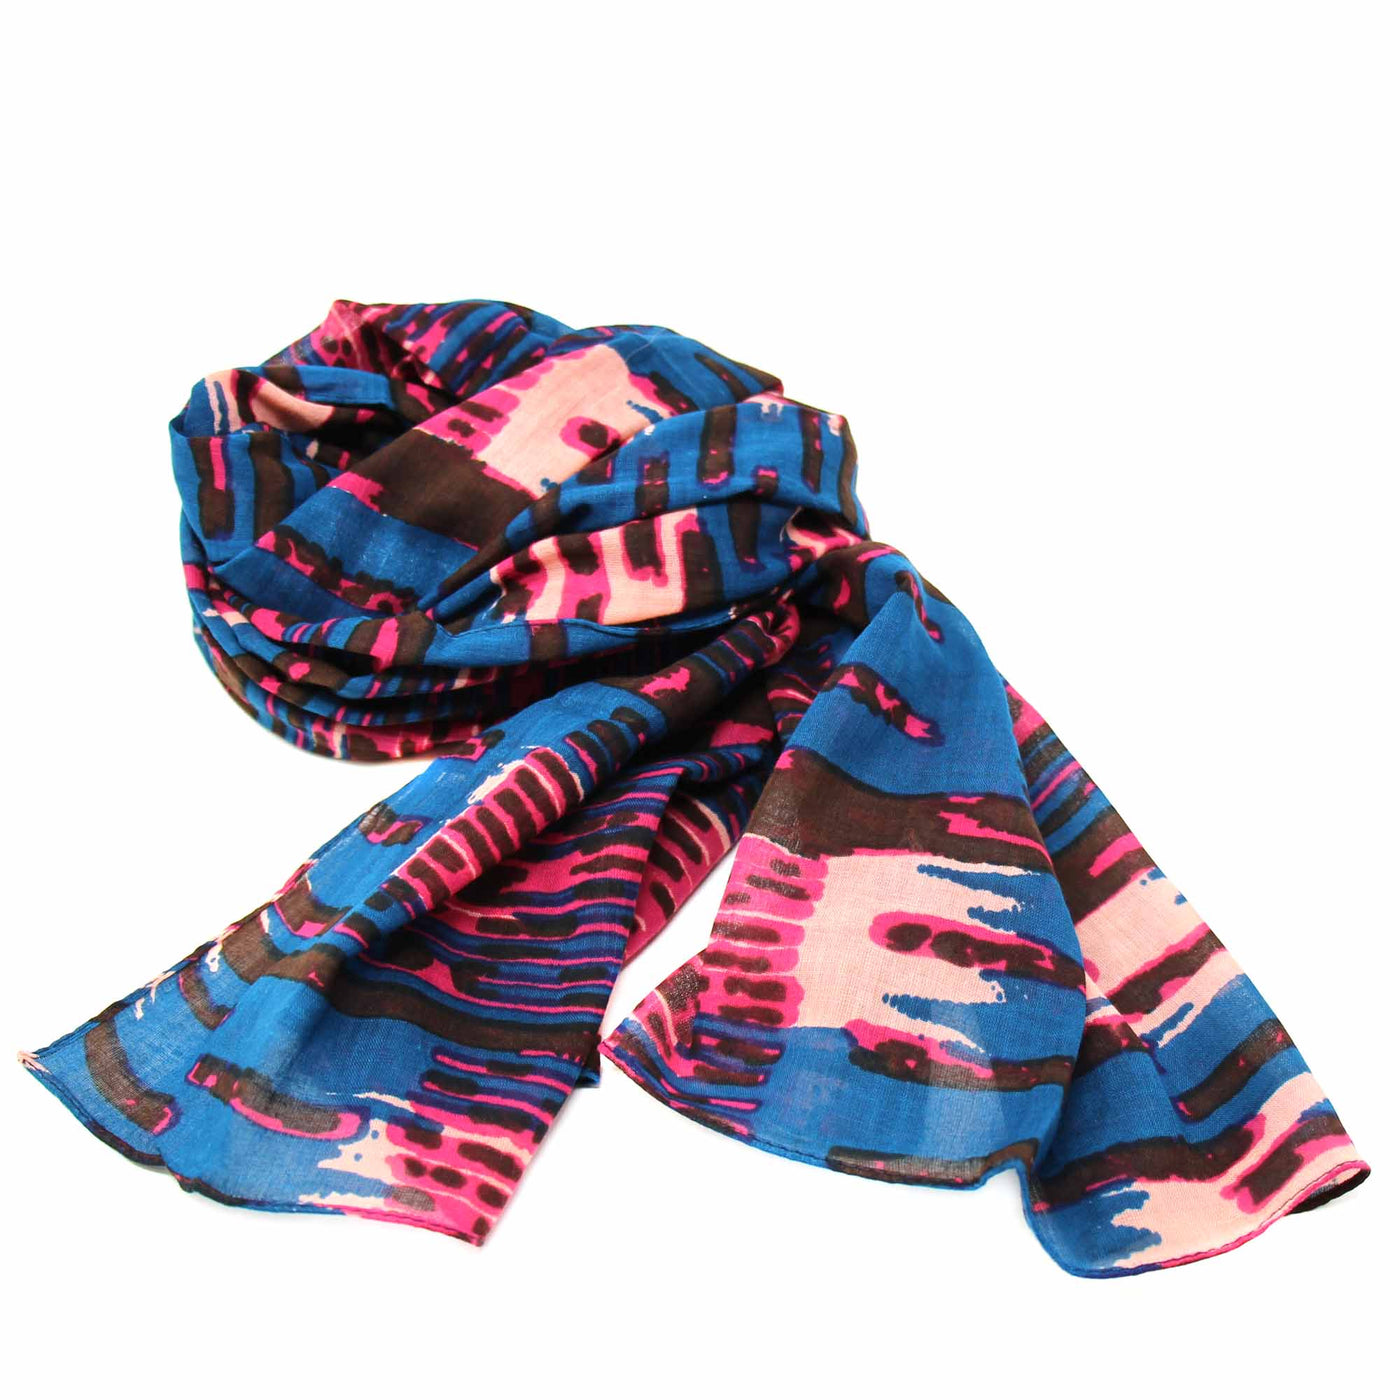 Hand-printed Cotton Scarf, Abstract Design - Yvonne’s 100th Wish Inc